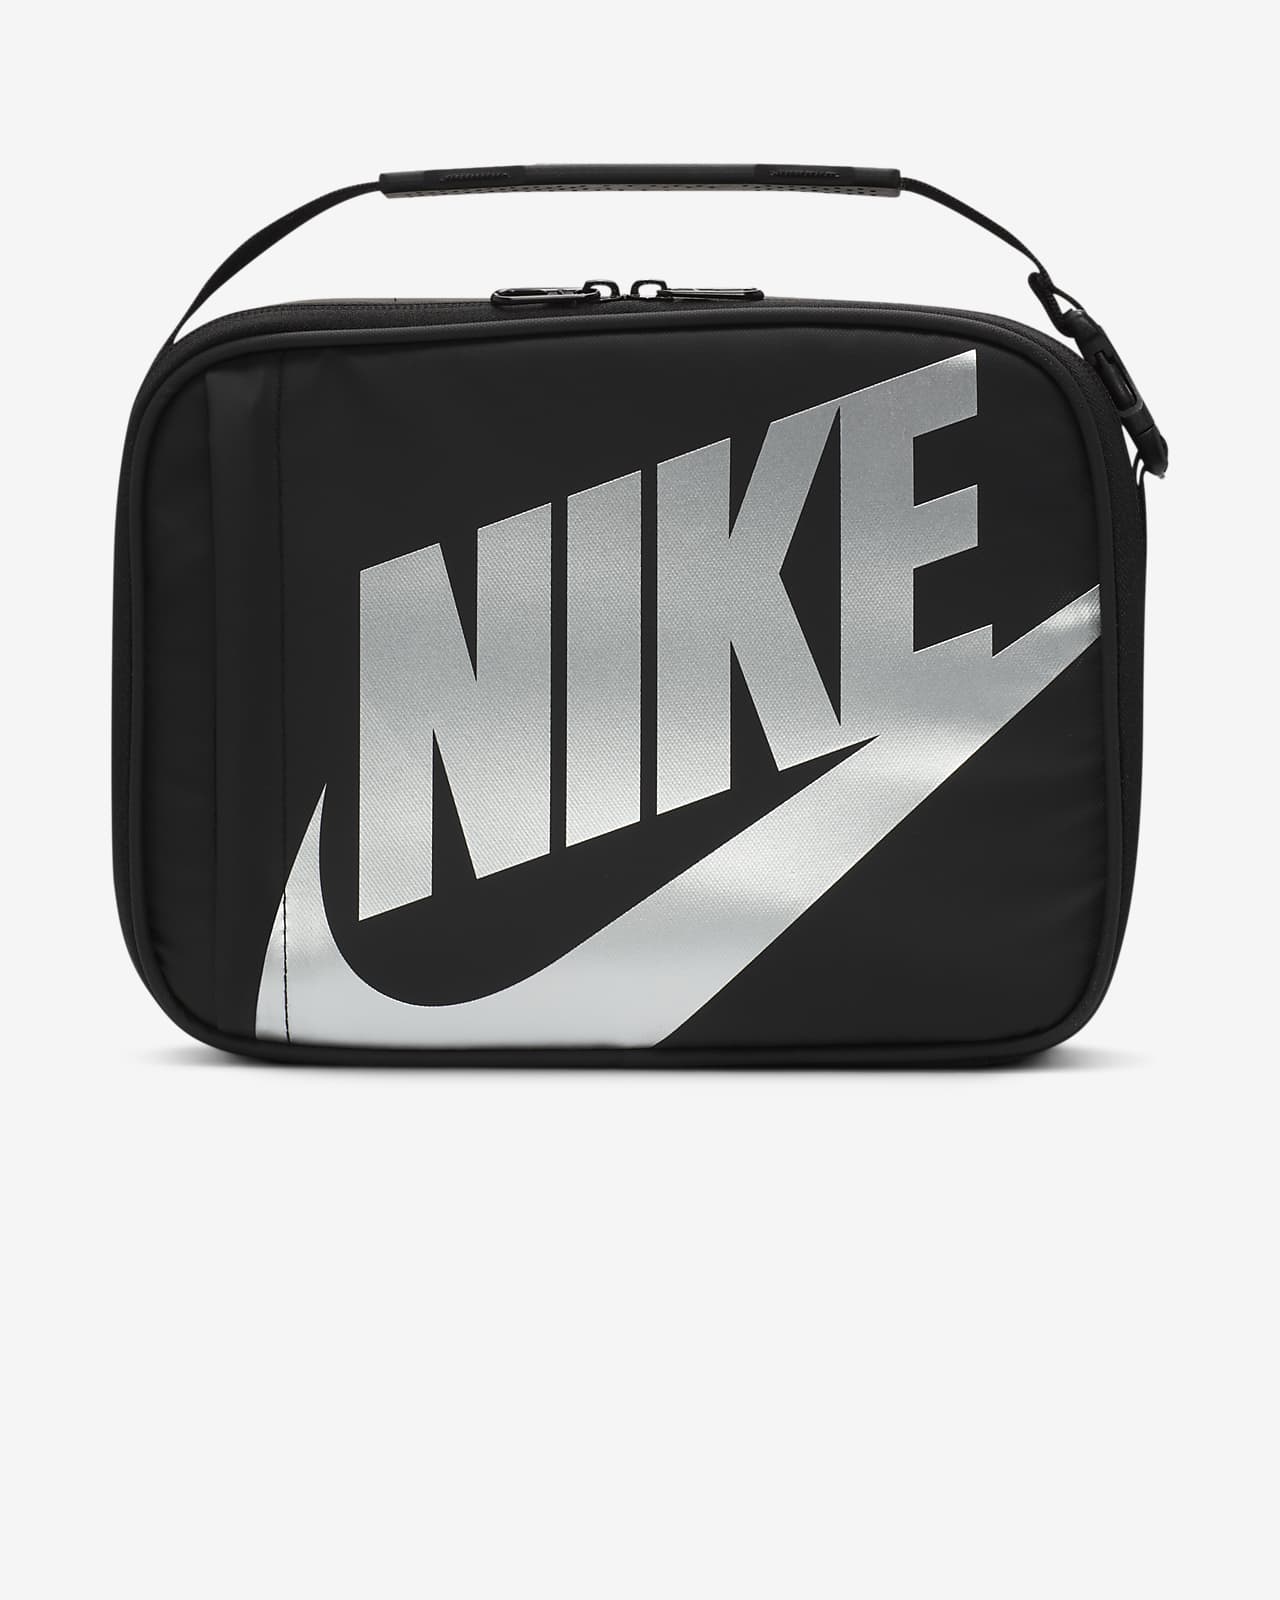 Nike Kid's Futura Fuel Pack Lunch Bag Insulated